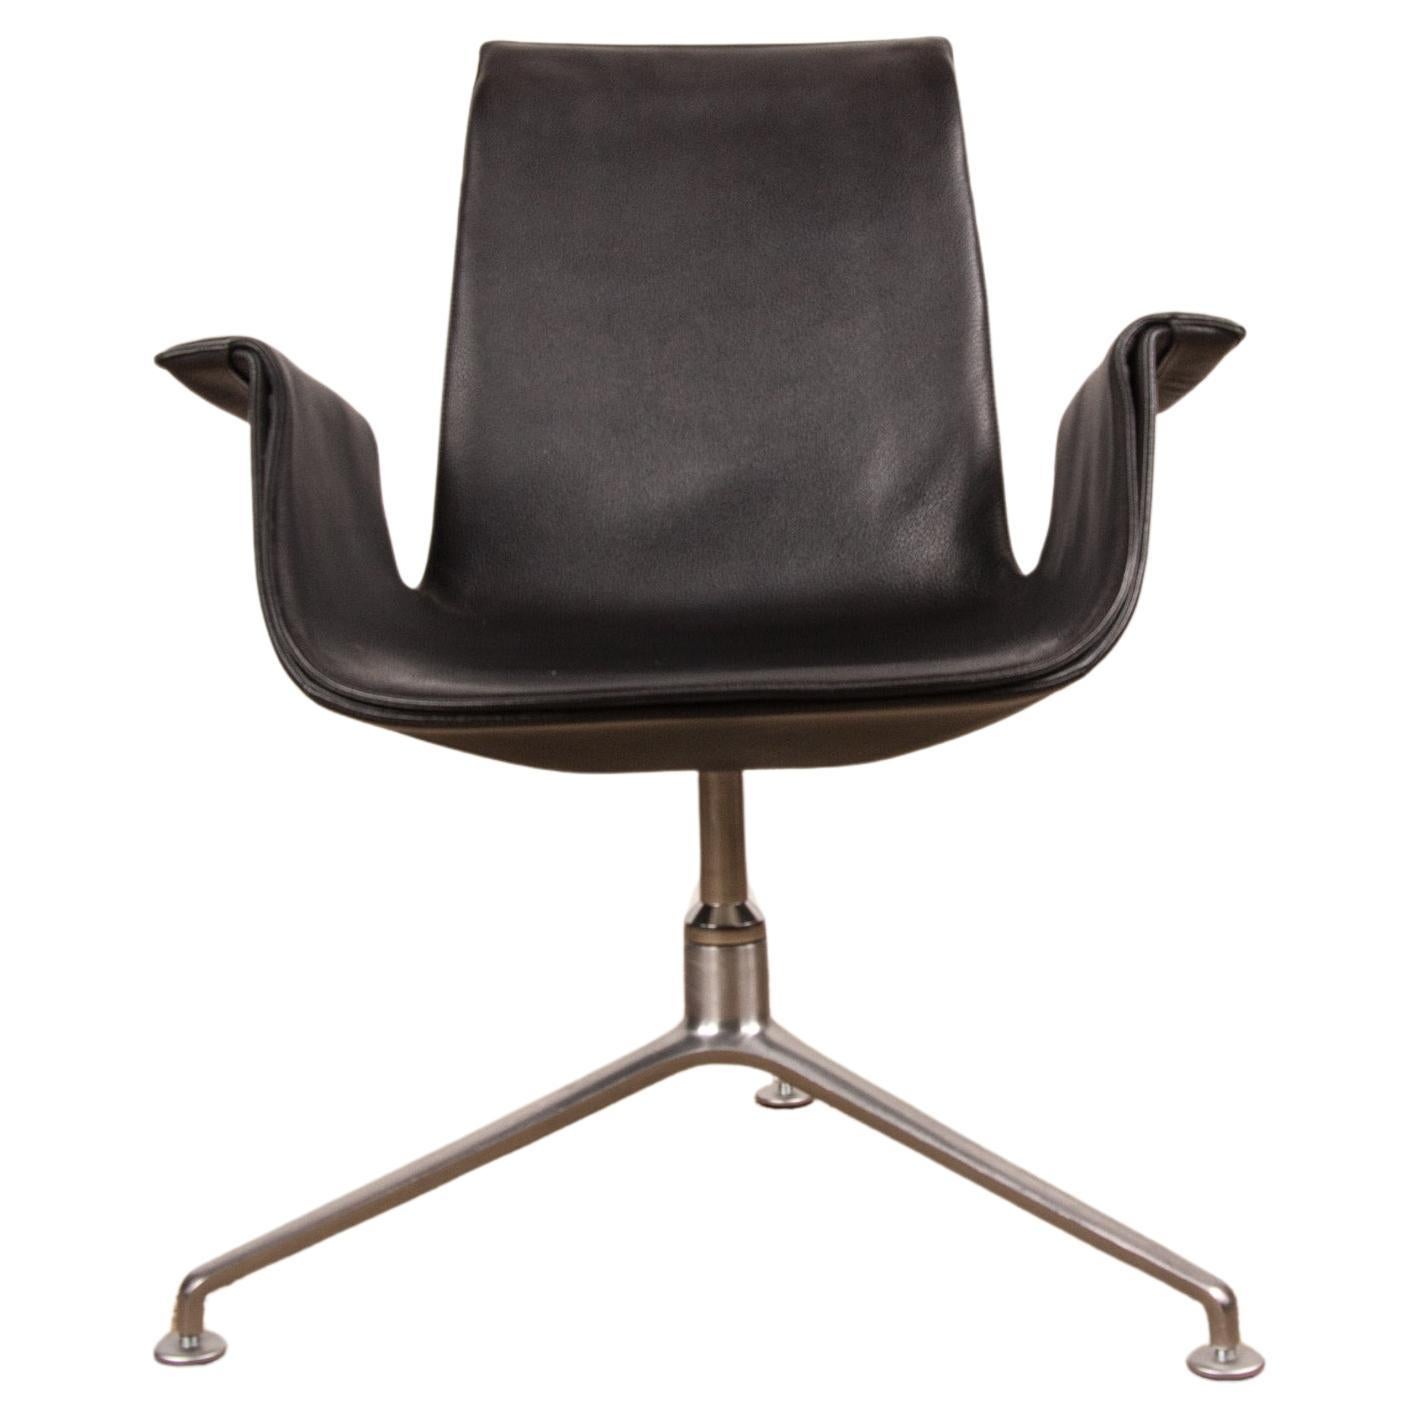 Danish Armchair, Black Leather and Chromed Steel, model FK 6725 Fabricius/Knoll. For Sale